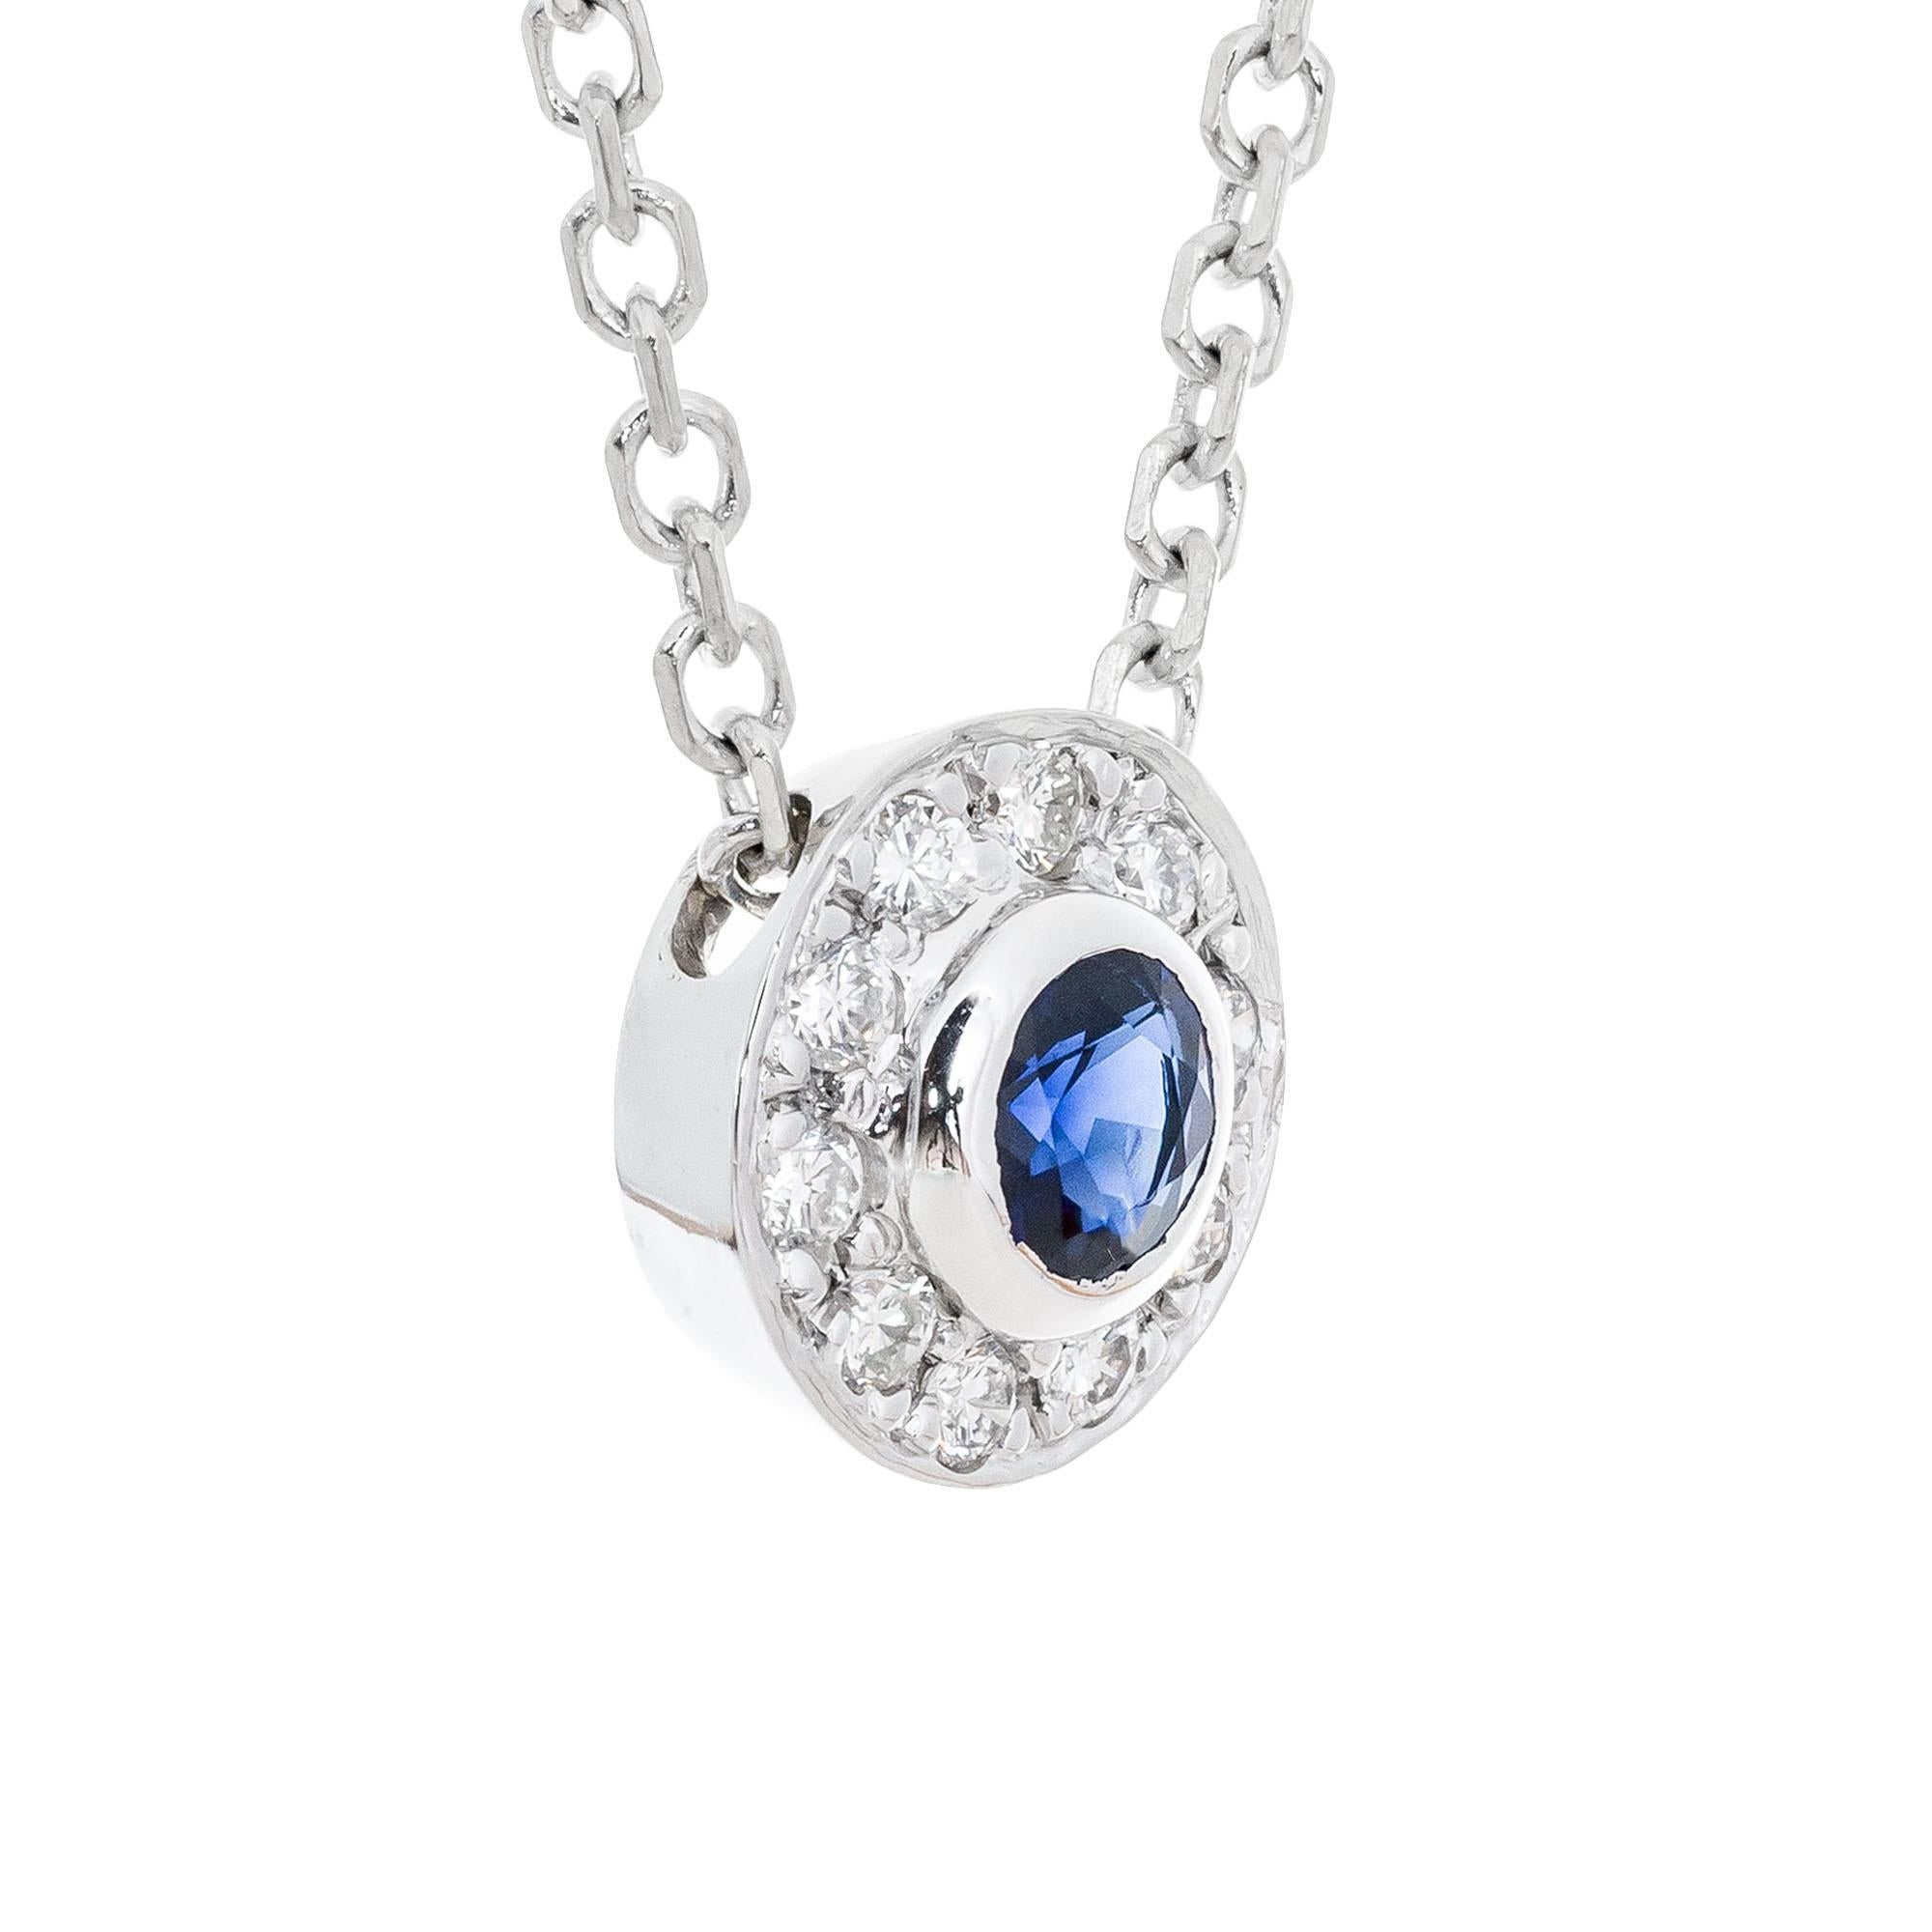 Rich blue round sapphire and diamond pendant necklace. .25ct center blue sapphire with a halo of 10 round brilliant cut diamonds. 16 inch chain. 

1 round blue sapphire, VS approx. .25cts
10 brilliant round cut diamonds, G-H VS approx. .10cts
14k